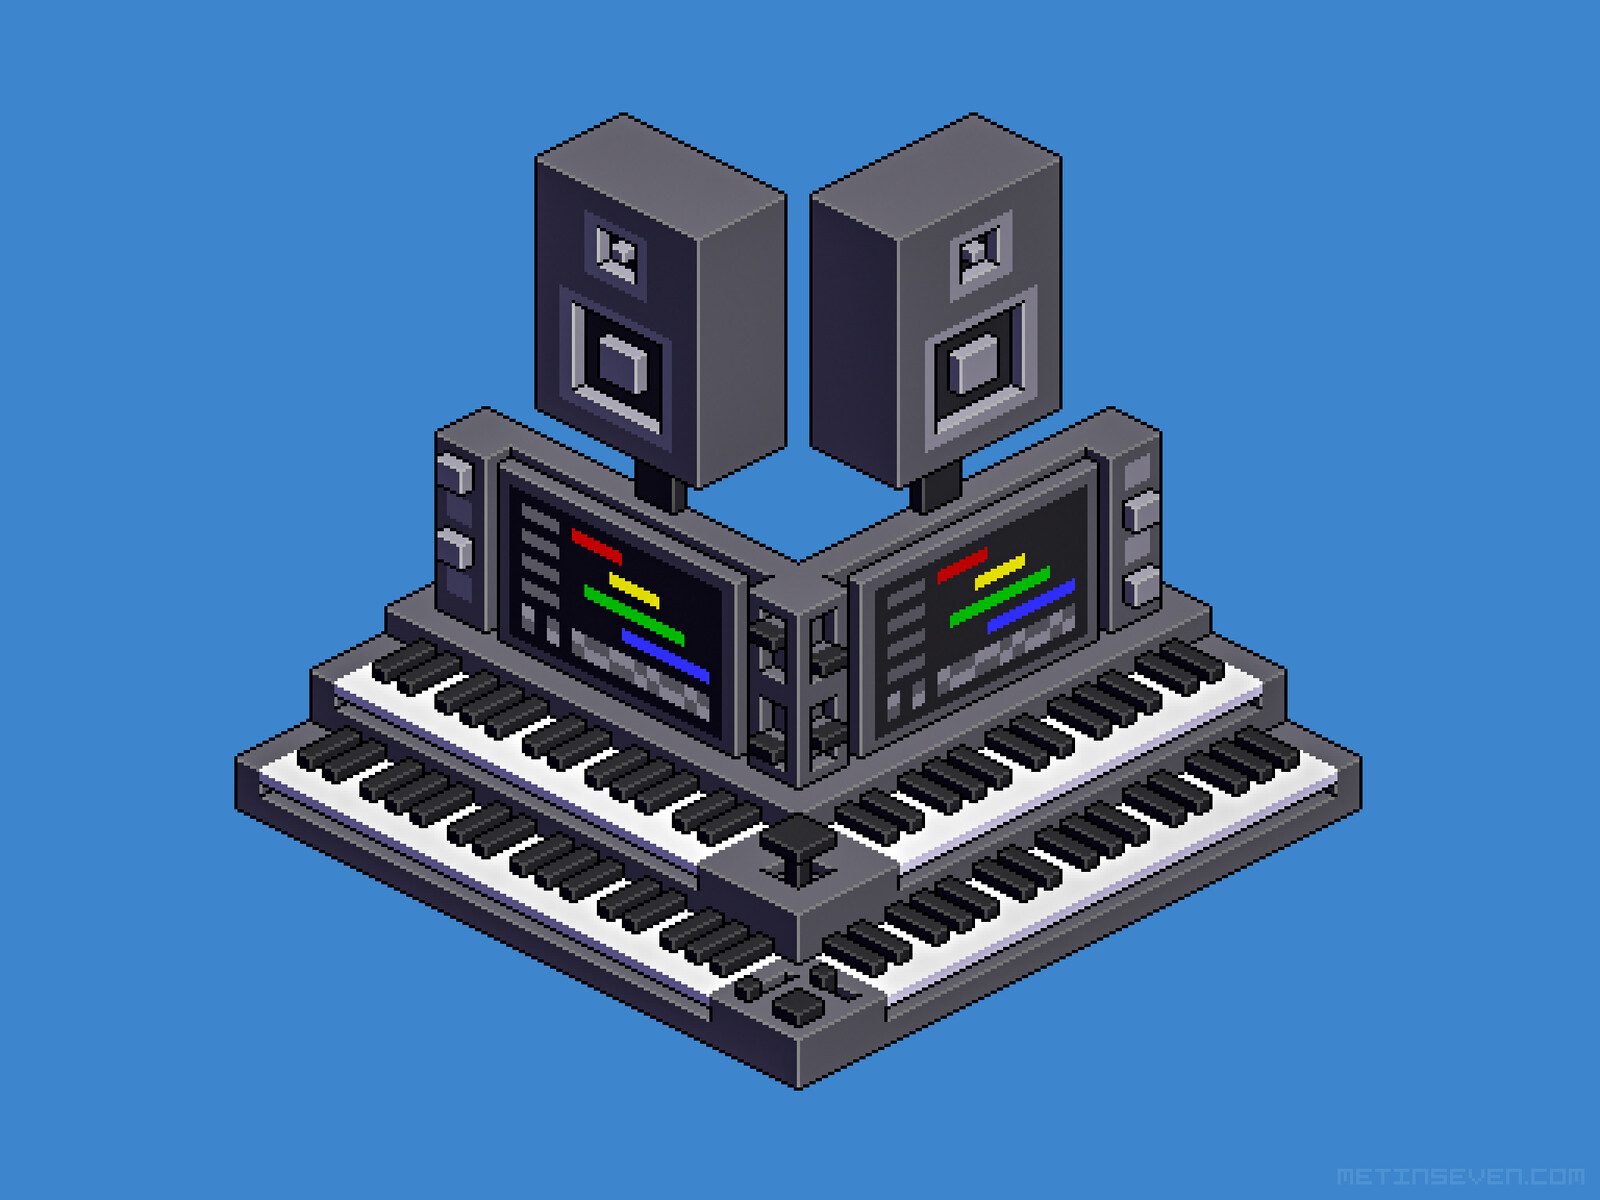 Isometric pixel art of an imaginary electronic music rig